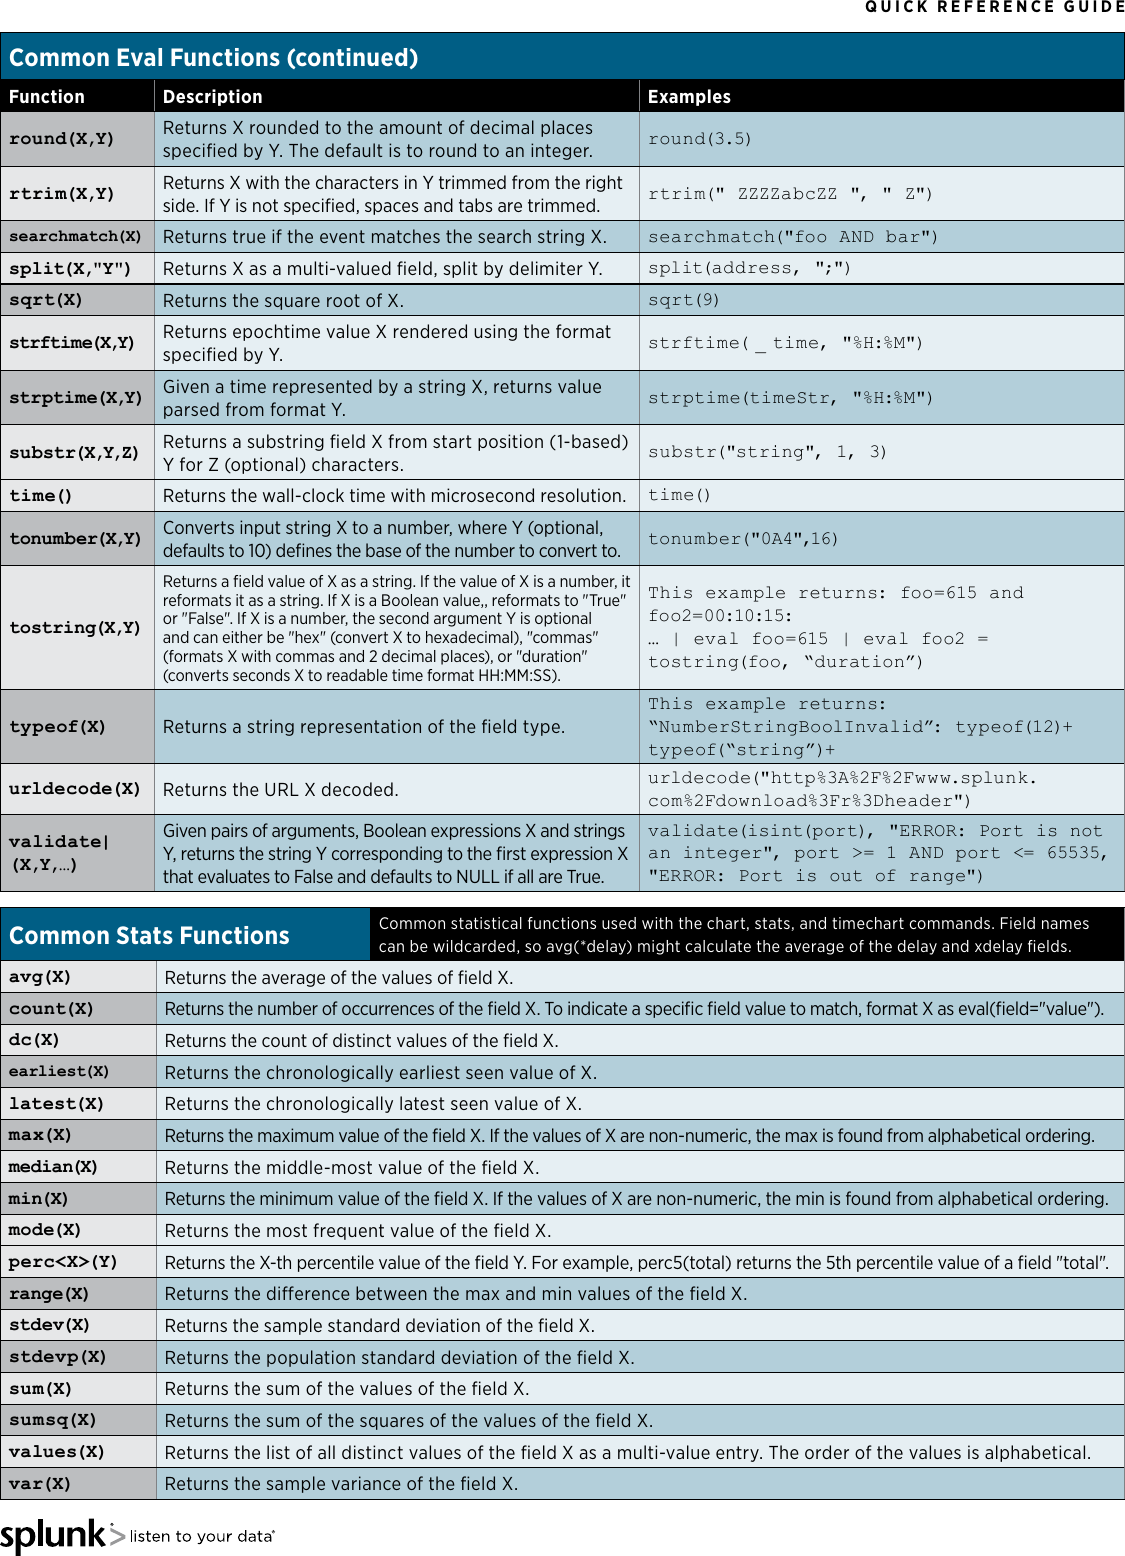 Page 4 of 6 - Splunk-quick-reference-guide